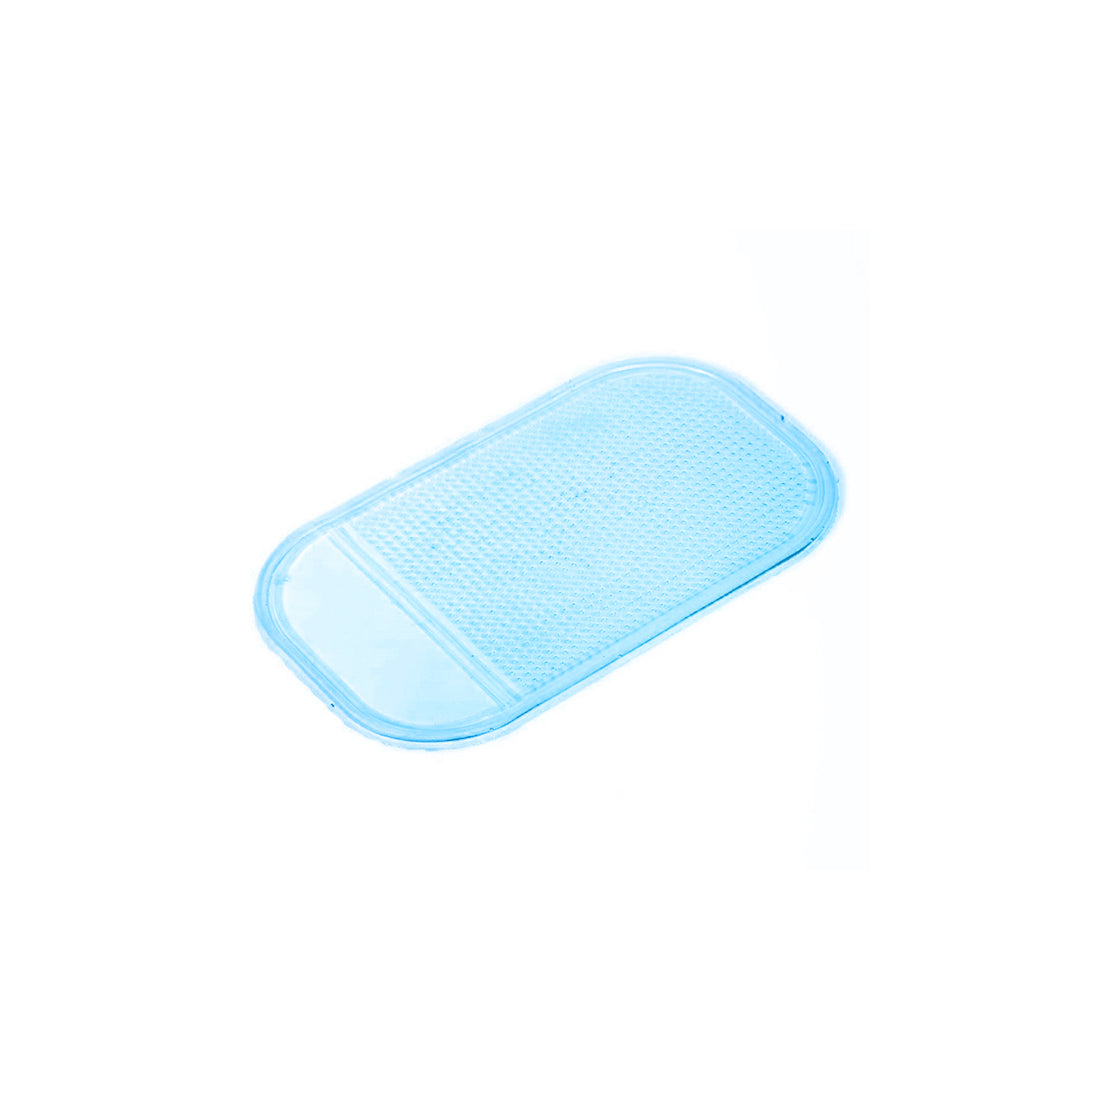 Set of Two Non Slip Dashboard Pads - Clear, Black, Blue or Pink